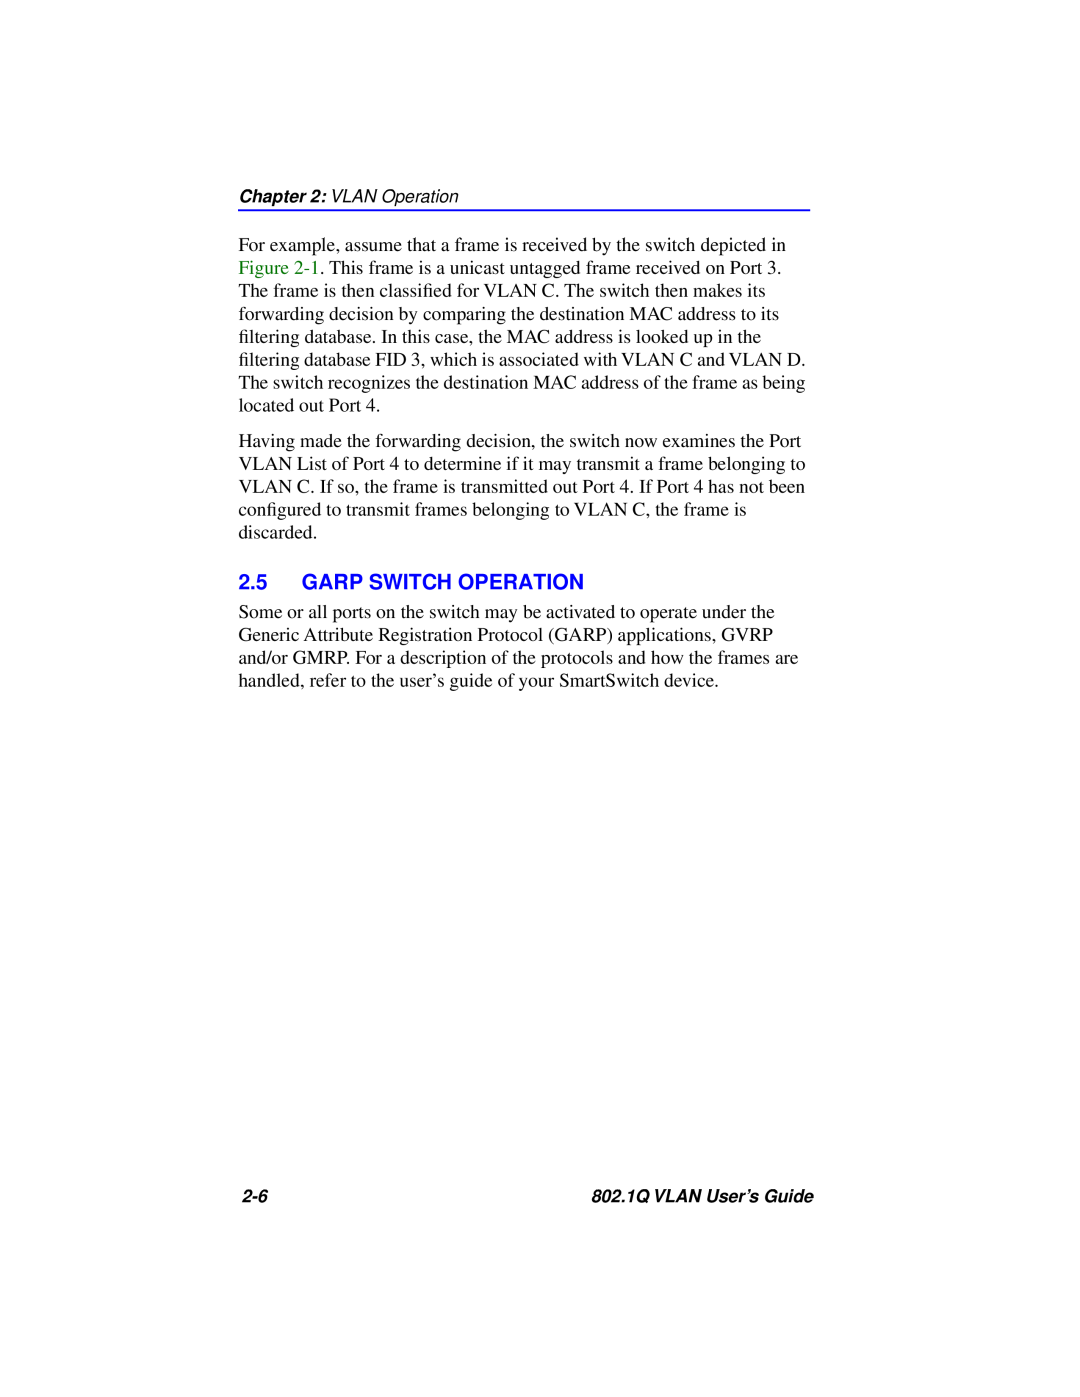 Cabletron Systems 802.1Q manual Garp Switch Operation 